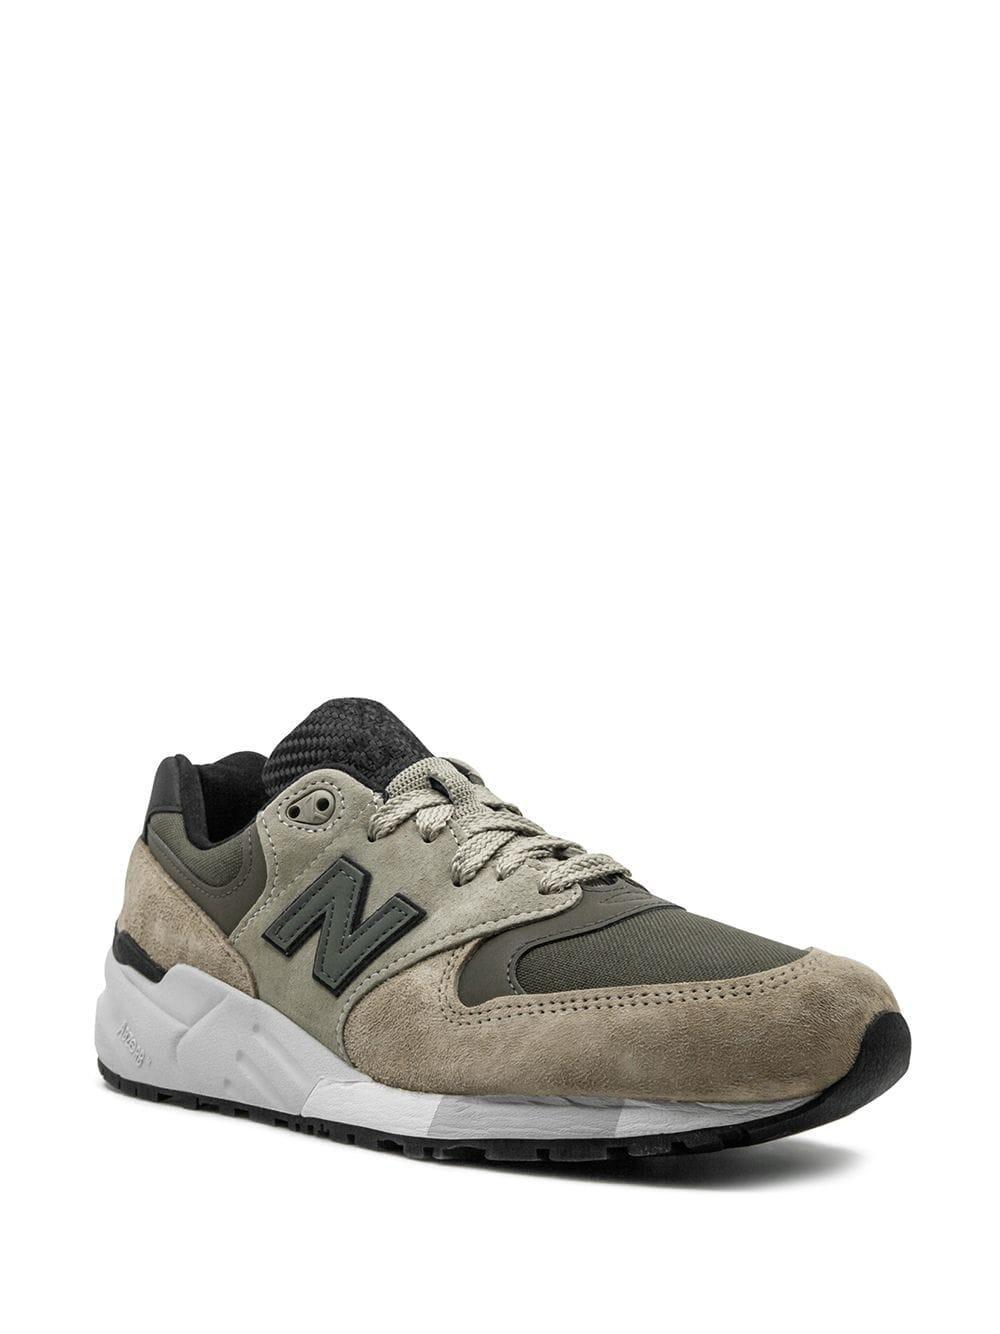 New Balance Lace 999 Sneakers in Brown for Men - Lyst